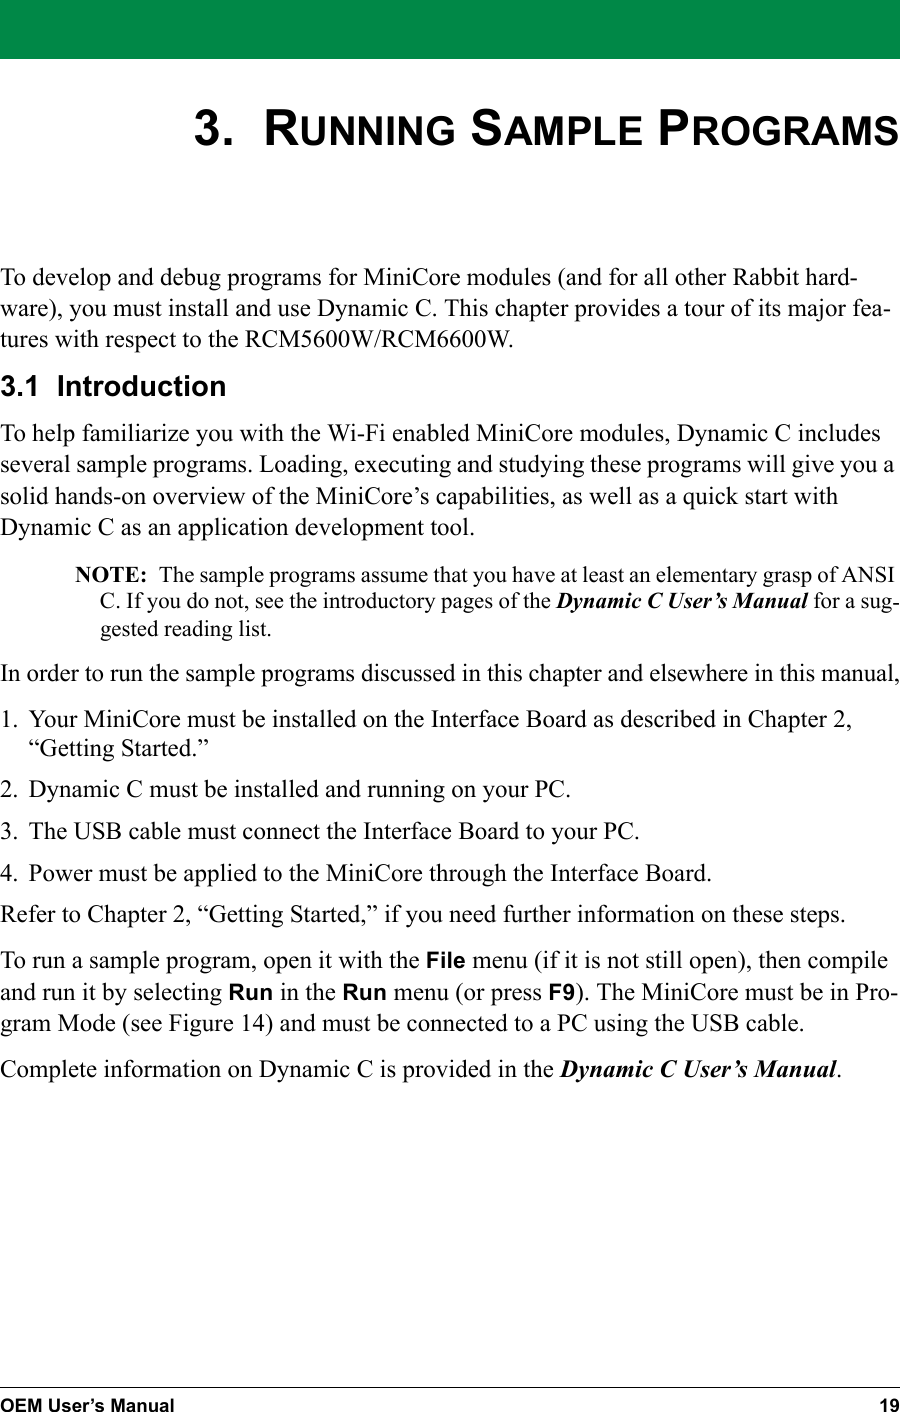 OEM User’s Manual 193.  RUNNING SAMPLE PROGRAMSTo develop and debug programs for MiniCore modules (and for all other Rabbit hard-ware), you must install and use Dynamic C. This chapter provides a tour of its major fea-tures with respect to the RCM5600W/RCM6600W.3.1  IntroductionTo help familiarize you with the Wi-Fi enabled MiniCore modules, Dynamic C includes several sample programs. Loading, executing and studying these programs will give you a solid hands-on overview of the MiniCore’s capabilities, as well as a quick start with Dynamic C as an application development tool.NOTE: The sample programs assume that you have at least an elementary grasp of ANSI C. If you do not, see the introductory pages of the Dynamic C User’s Manual for a sug-gested reading list.In order to run the sample programs discussed in this chapter and elsewhere in this manual,1. Your MiniCore must be installed on the Interface Board as described in Chapter 2, “Getting Started.”2. Dynamic C must be installed and running on your PC.3. The USB cable must connect the Interface Board to your PC.4. Power must be applied to the MiniCore through the Interface Board.Refer to Chapter 2, “Getting Started,” if you need further information on these steps.To run a sample program, open it with the File menu (if it is not still open), then compile and run it by selecting Run in the Run menu (or press F9). The MiniCore must be in Pro-gram Mode (see Figure 14) and must be connected to a PC using the USB cable.Complete information on Dynamic C is provided in the Dynamic C User’s Manual.